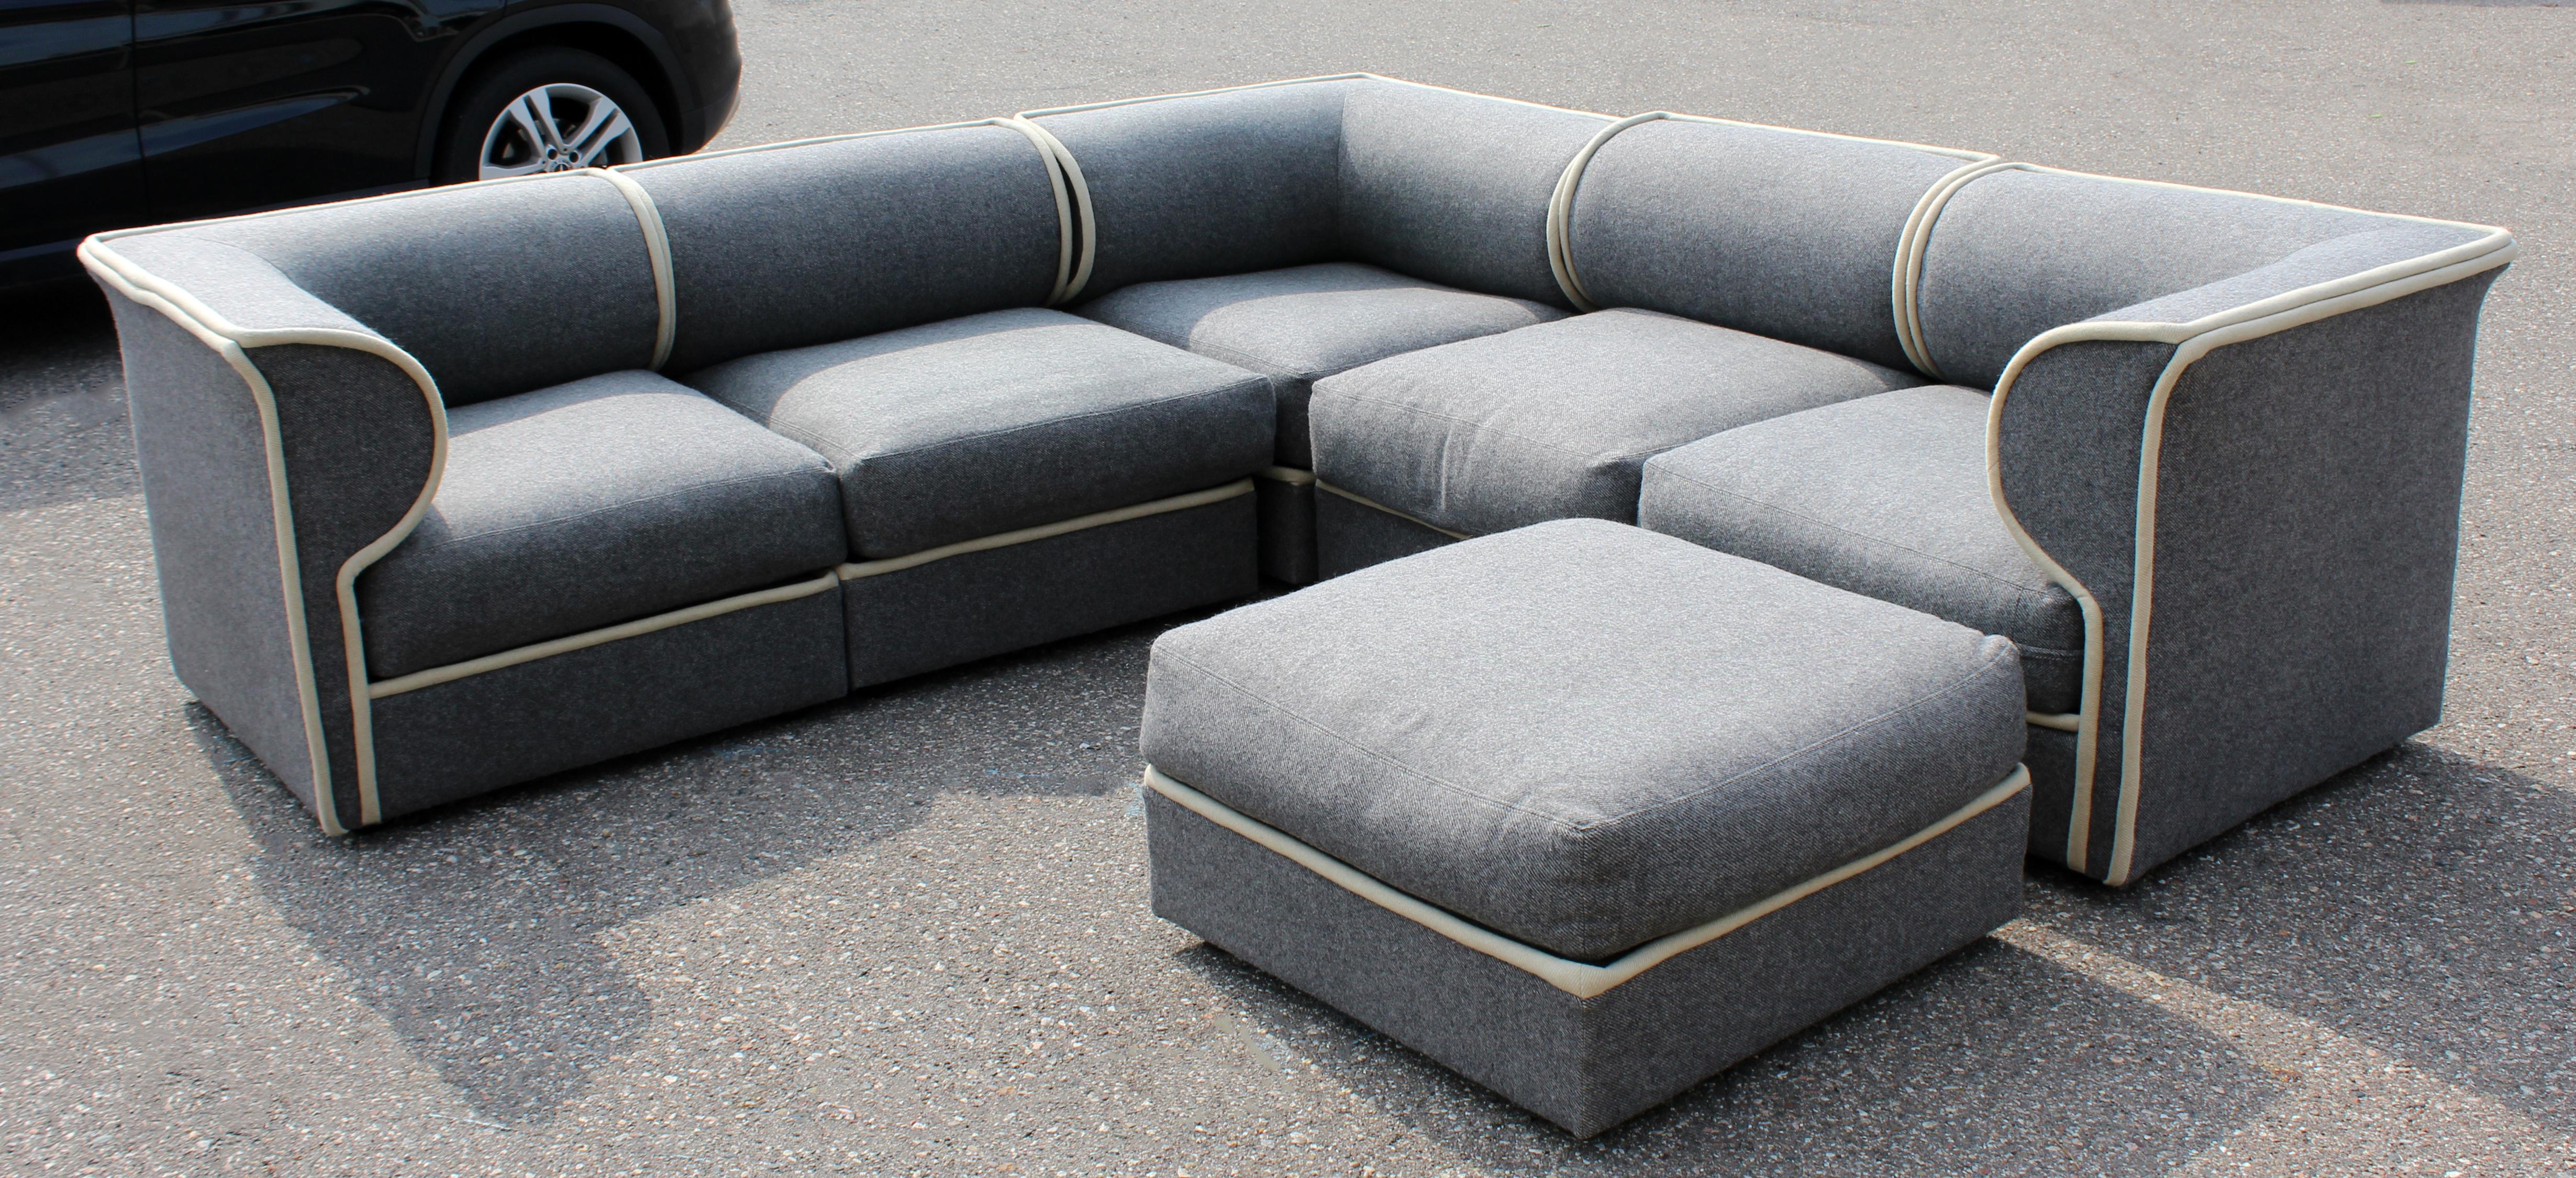 Late 20th Century Contemporary Directional 5-Piece Curved Modular Sectional Sofa